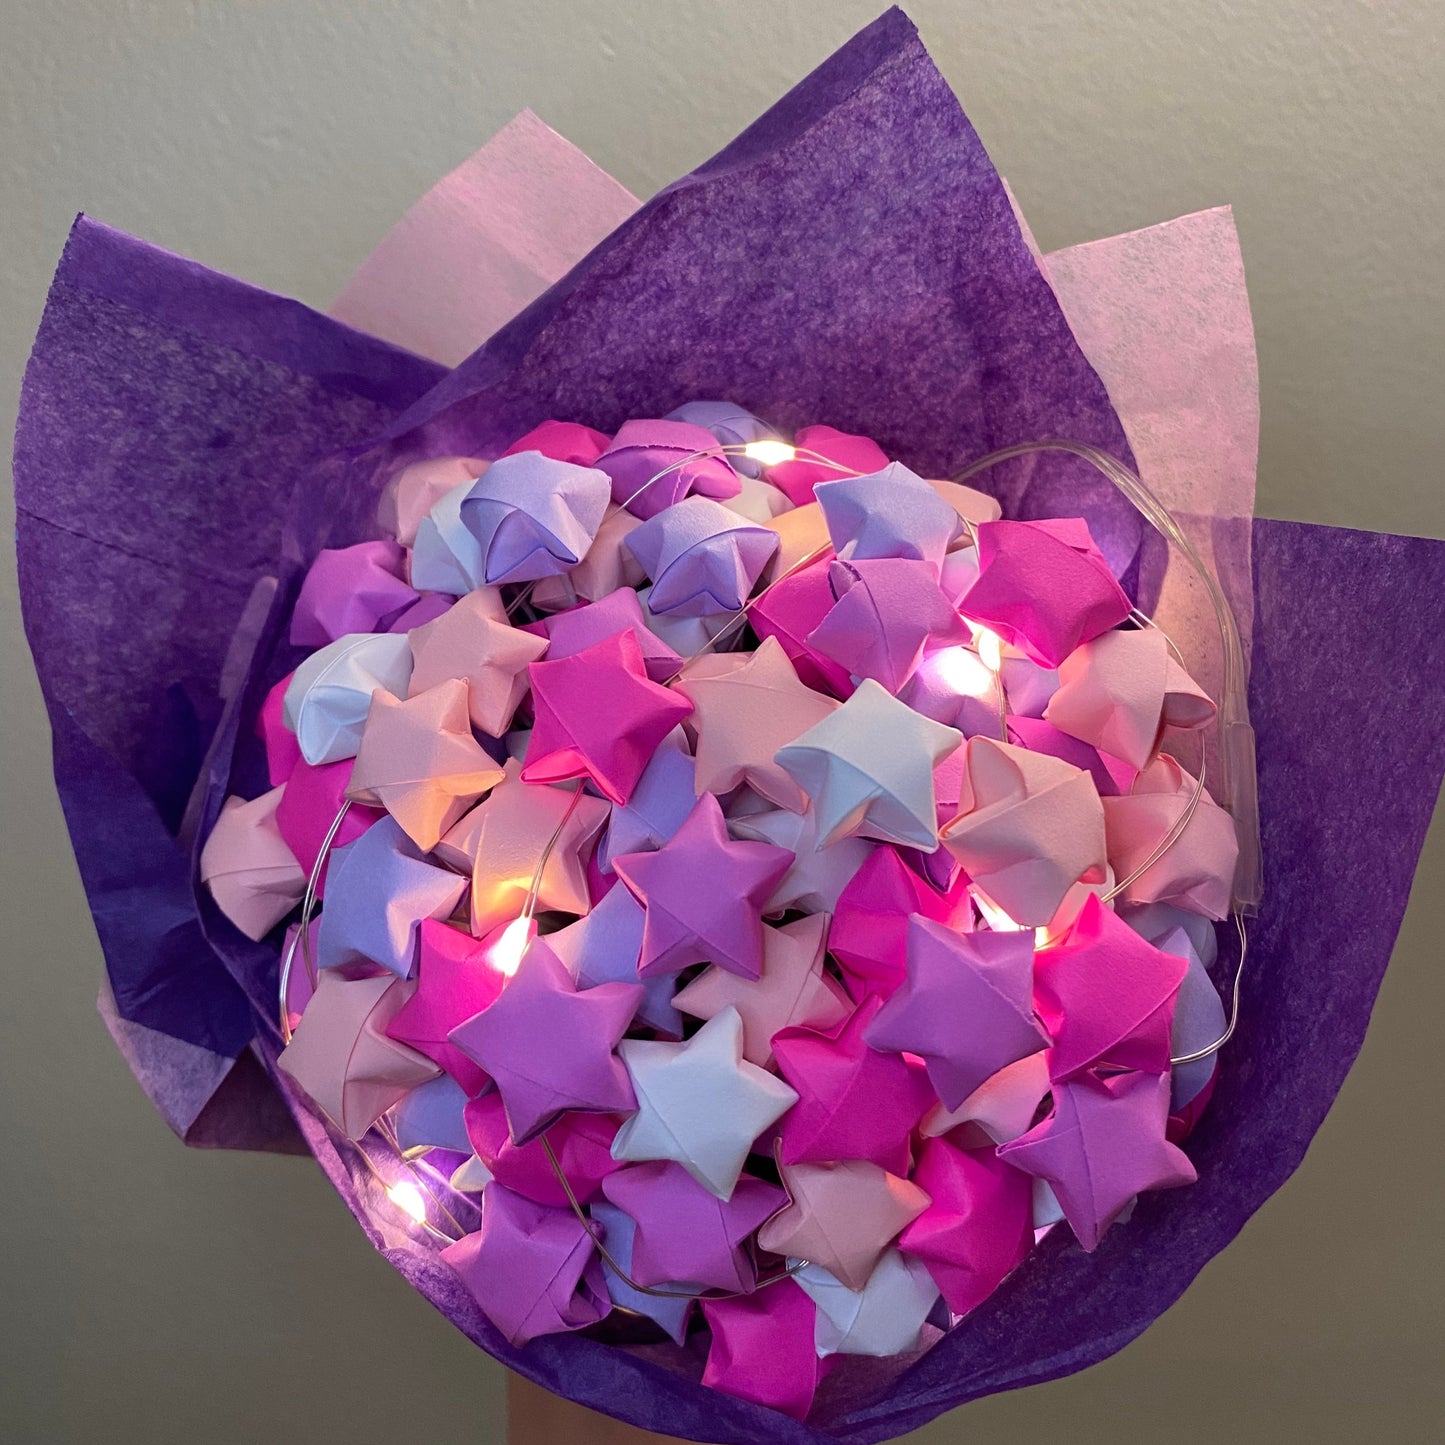 Lucky Star Bouquet - customize your own bouquet